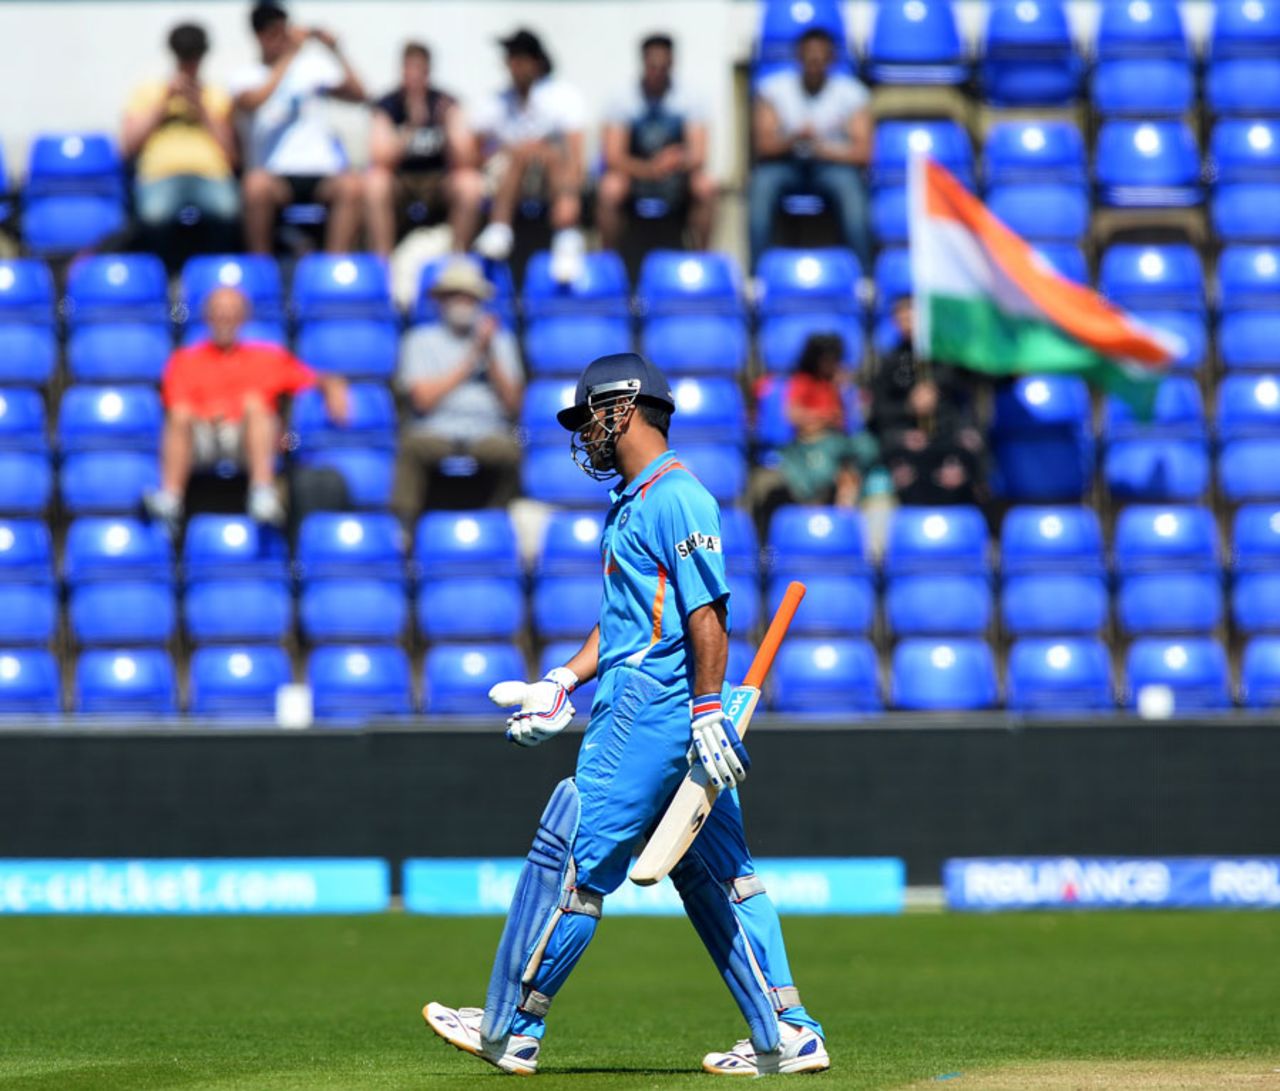 MS Dhoni walks back after being dismissed on 91, India v Australia, Champions Trophy warm-up, Cardiff, June 4, 2013